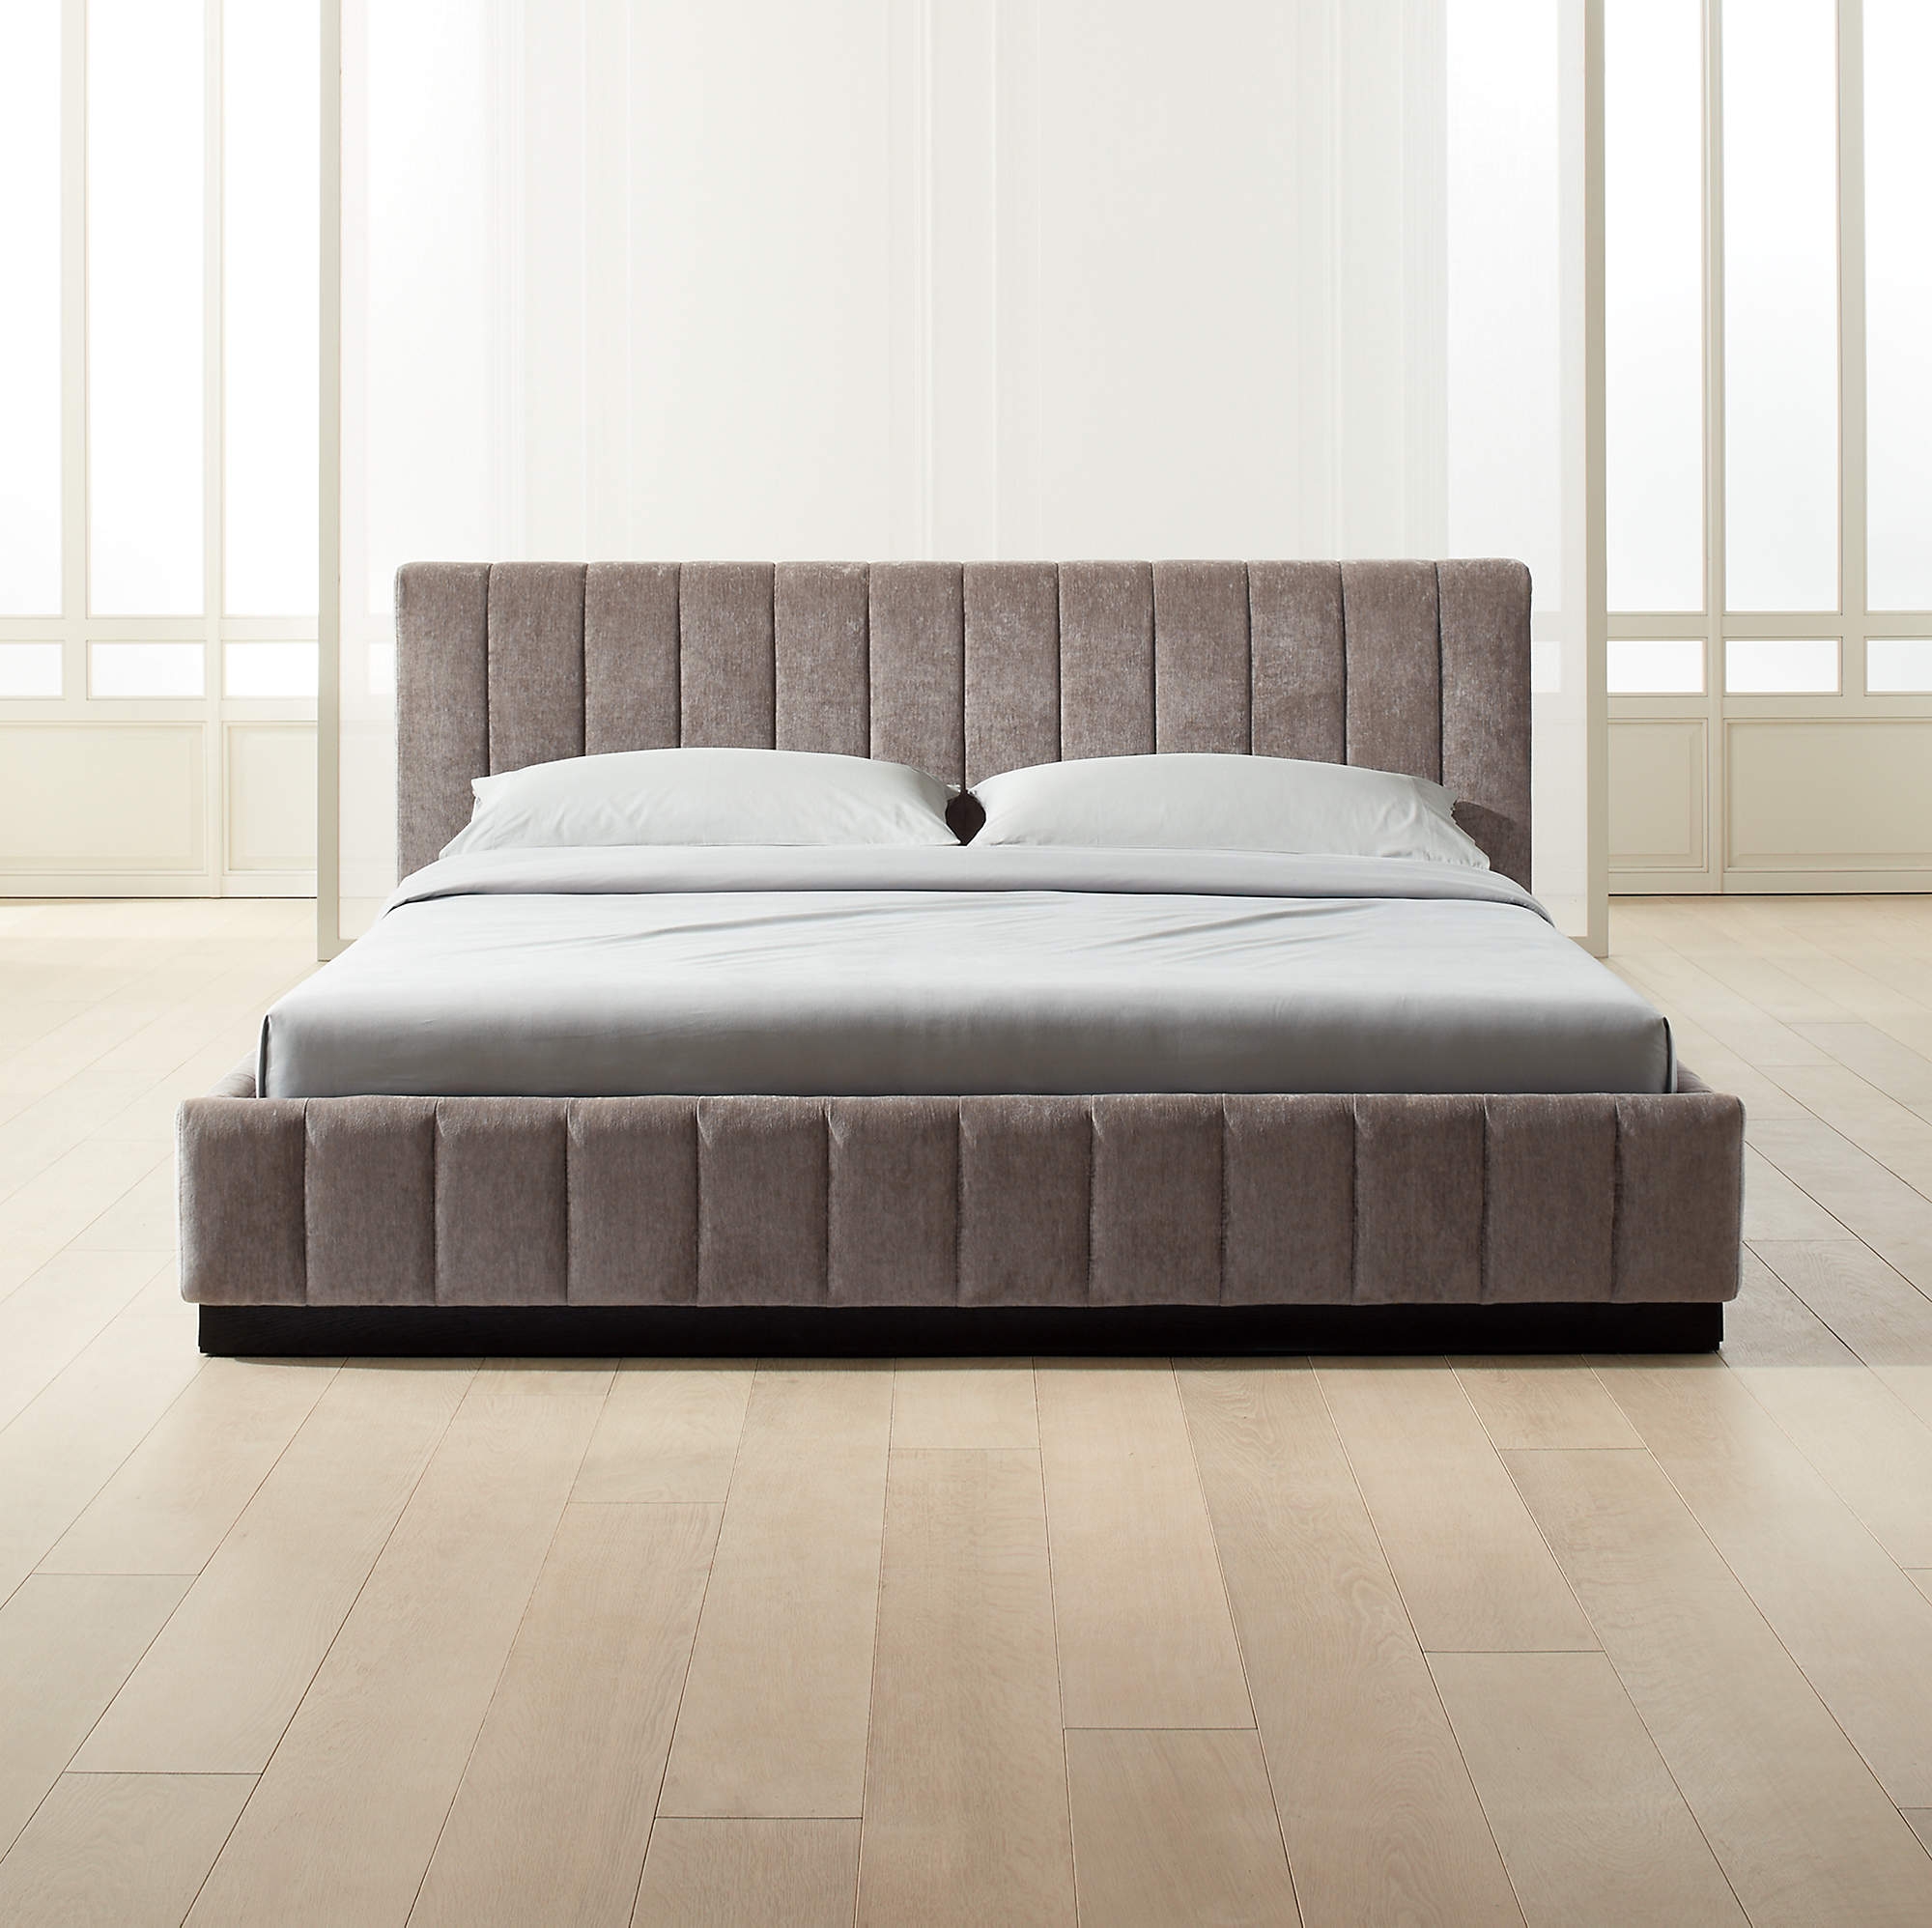 Forte Grey California King Bed - Image 2